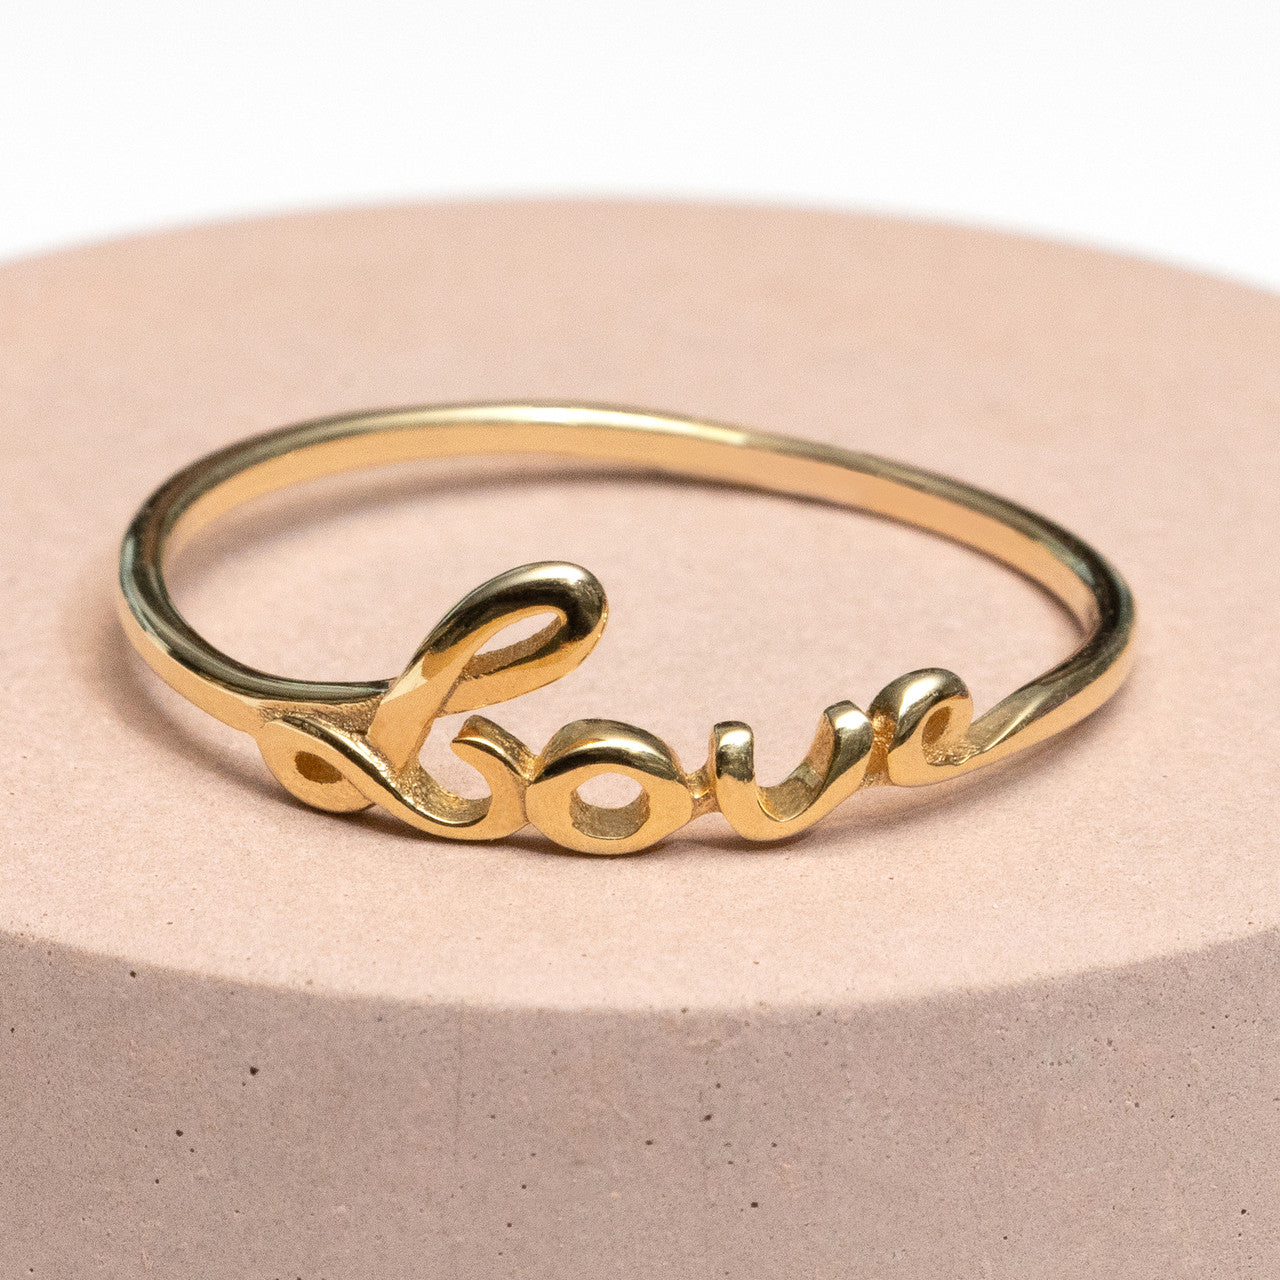 A gold ring with the word love on it